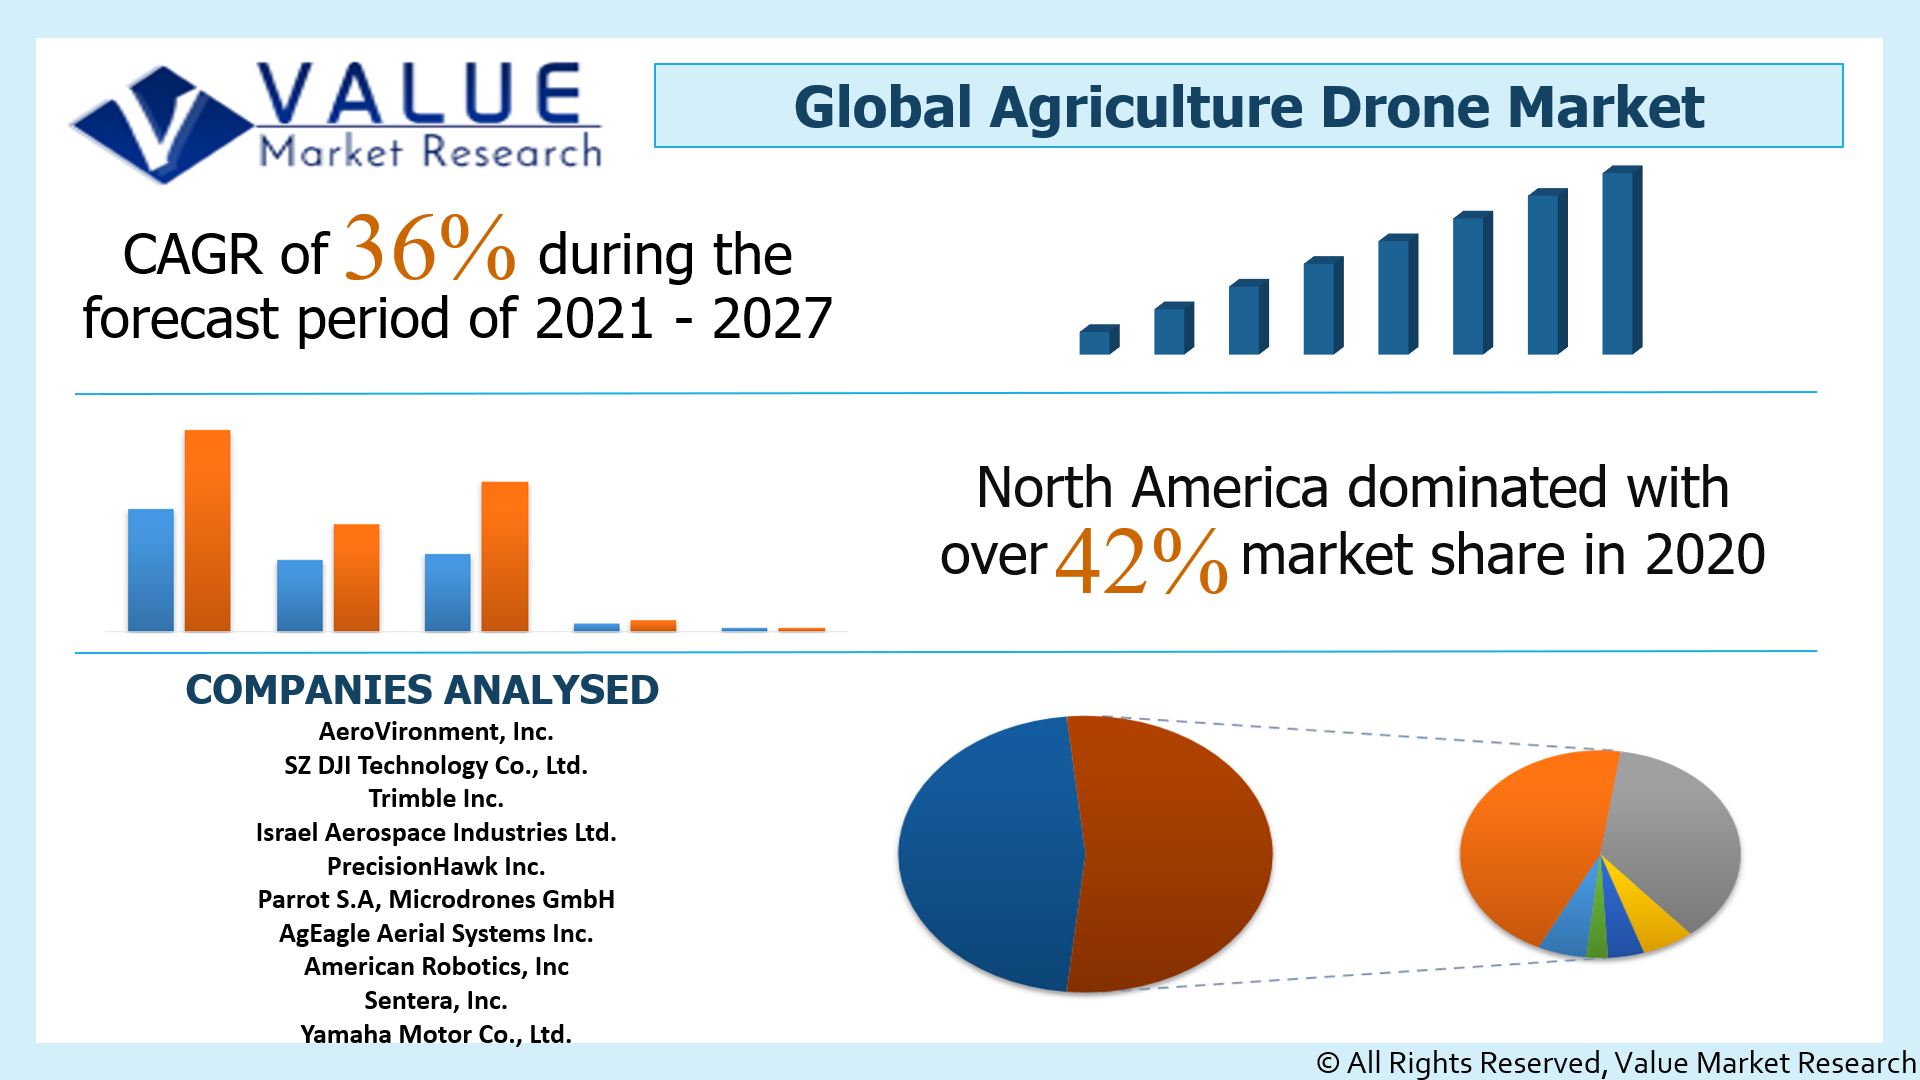 Global Agriculture Drone Market Share